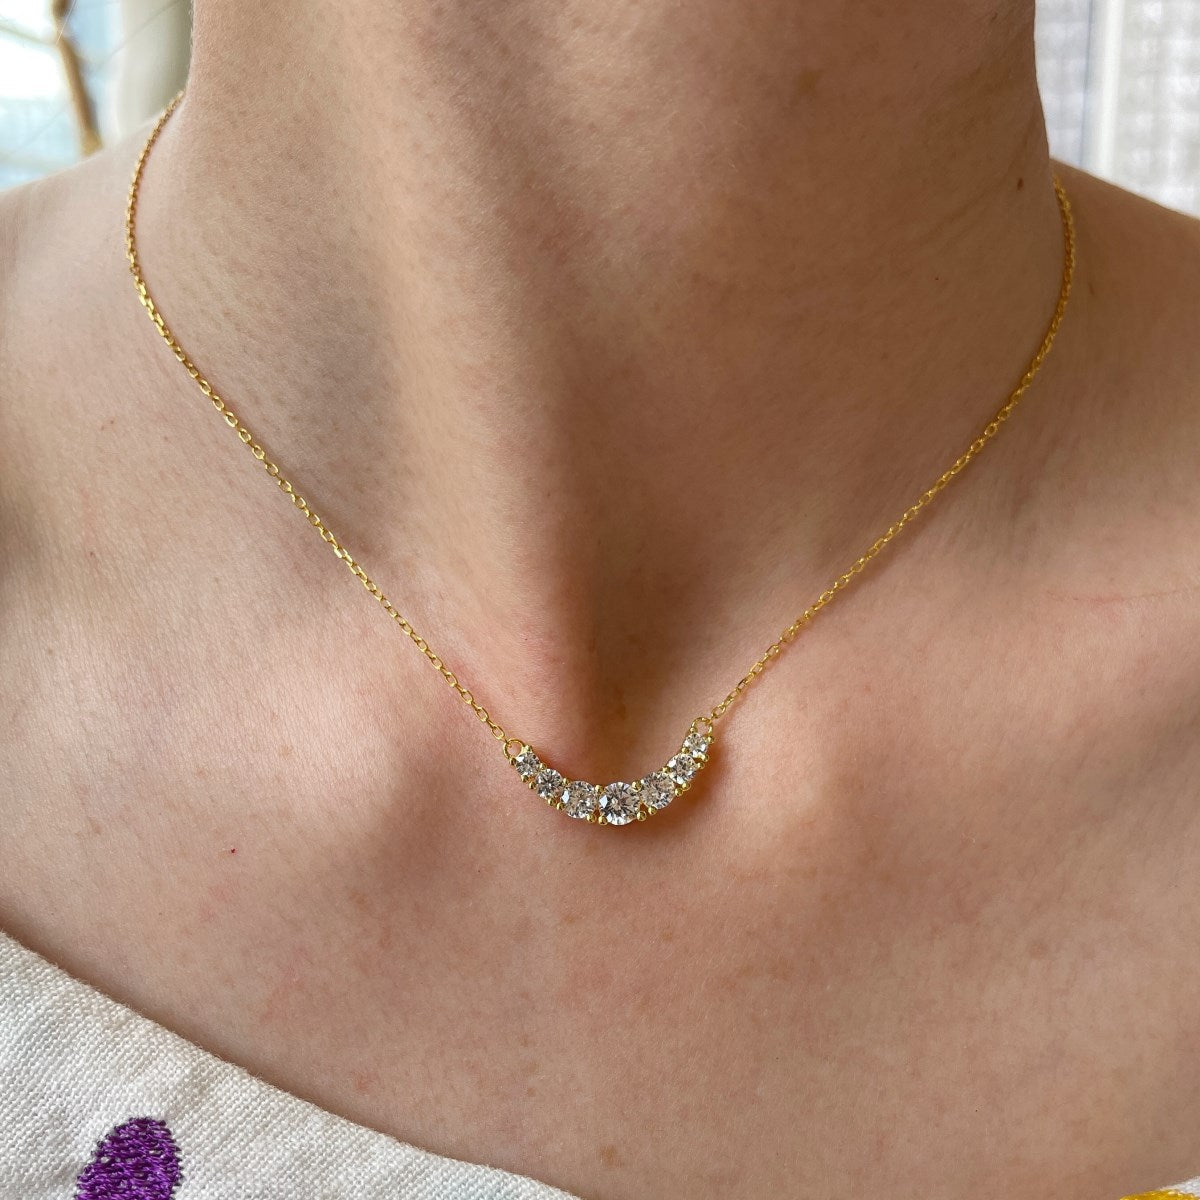 Leia Necklace in Gold